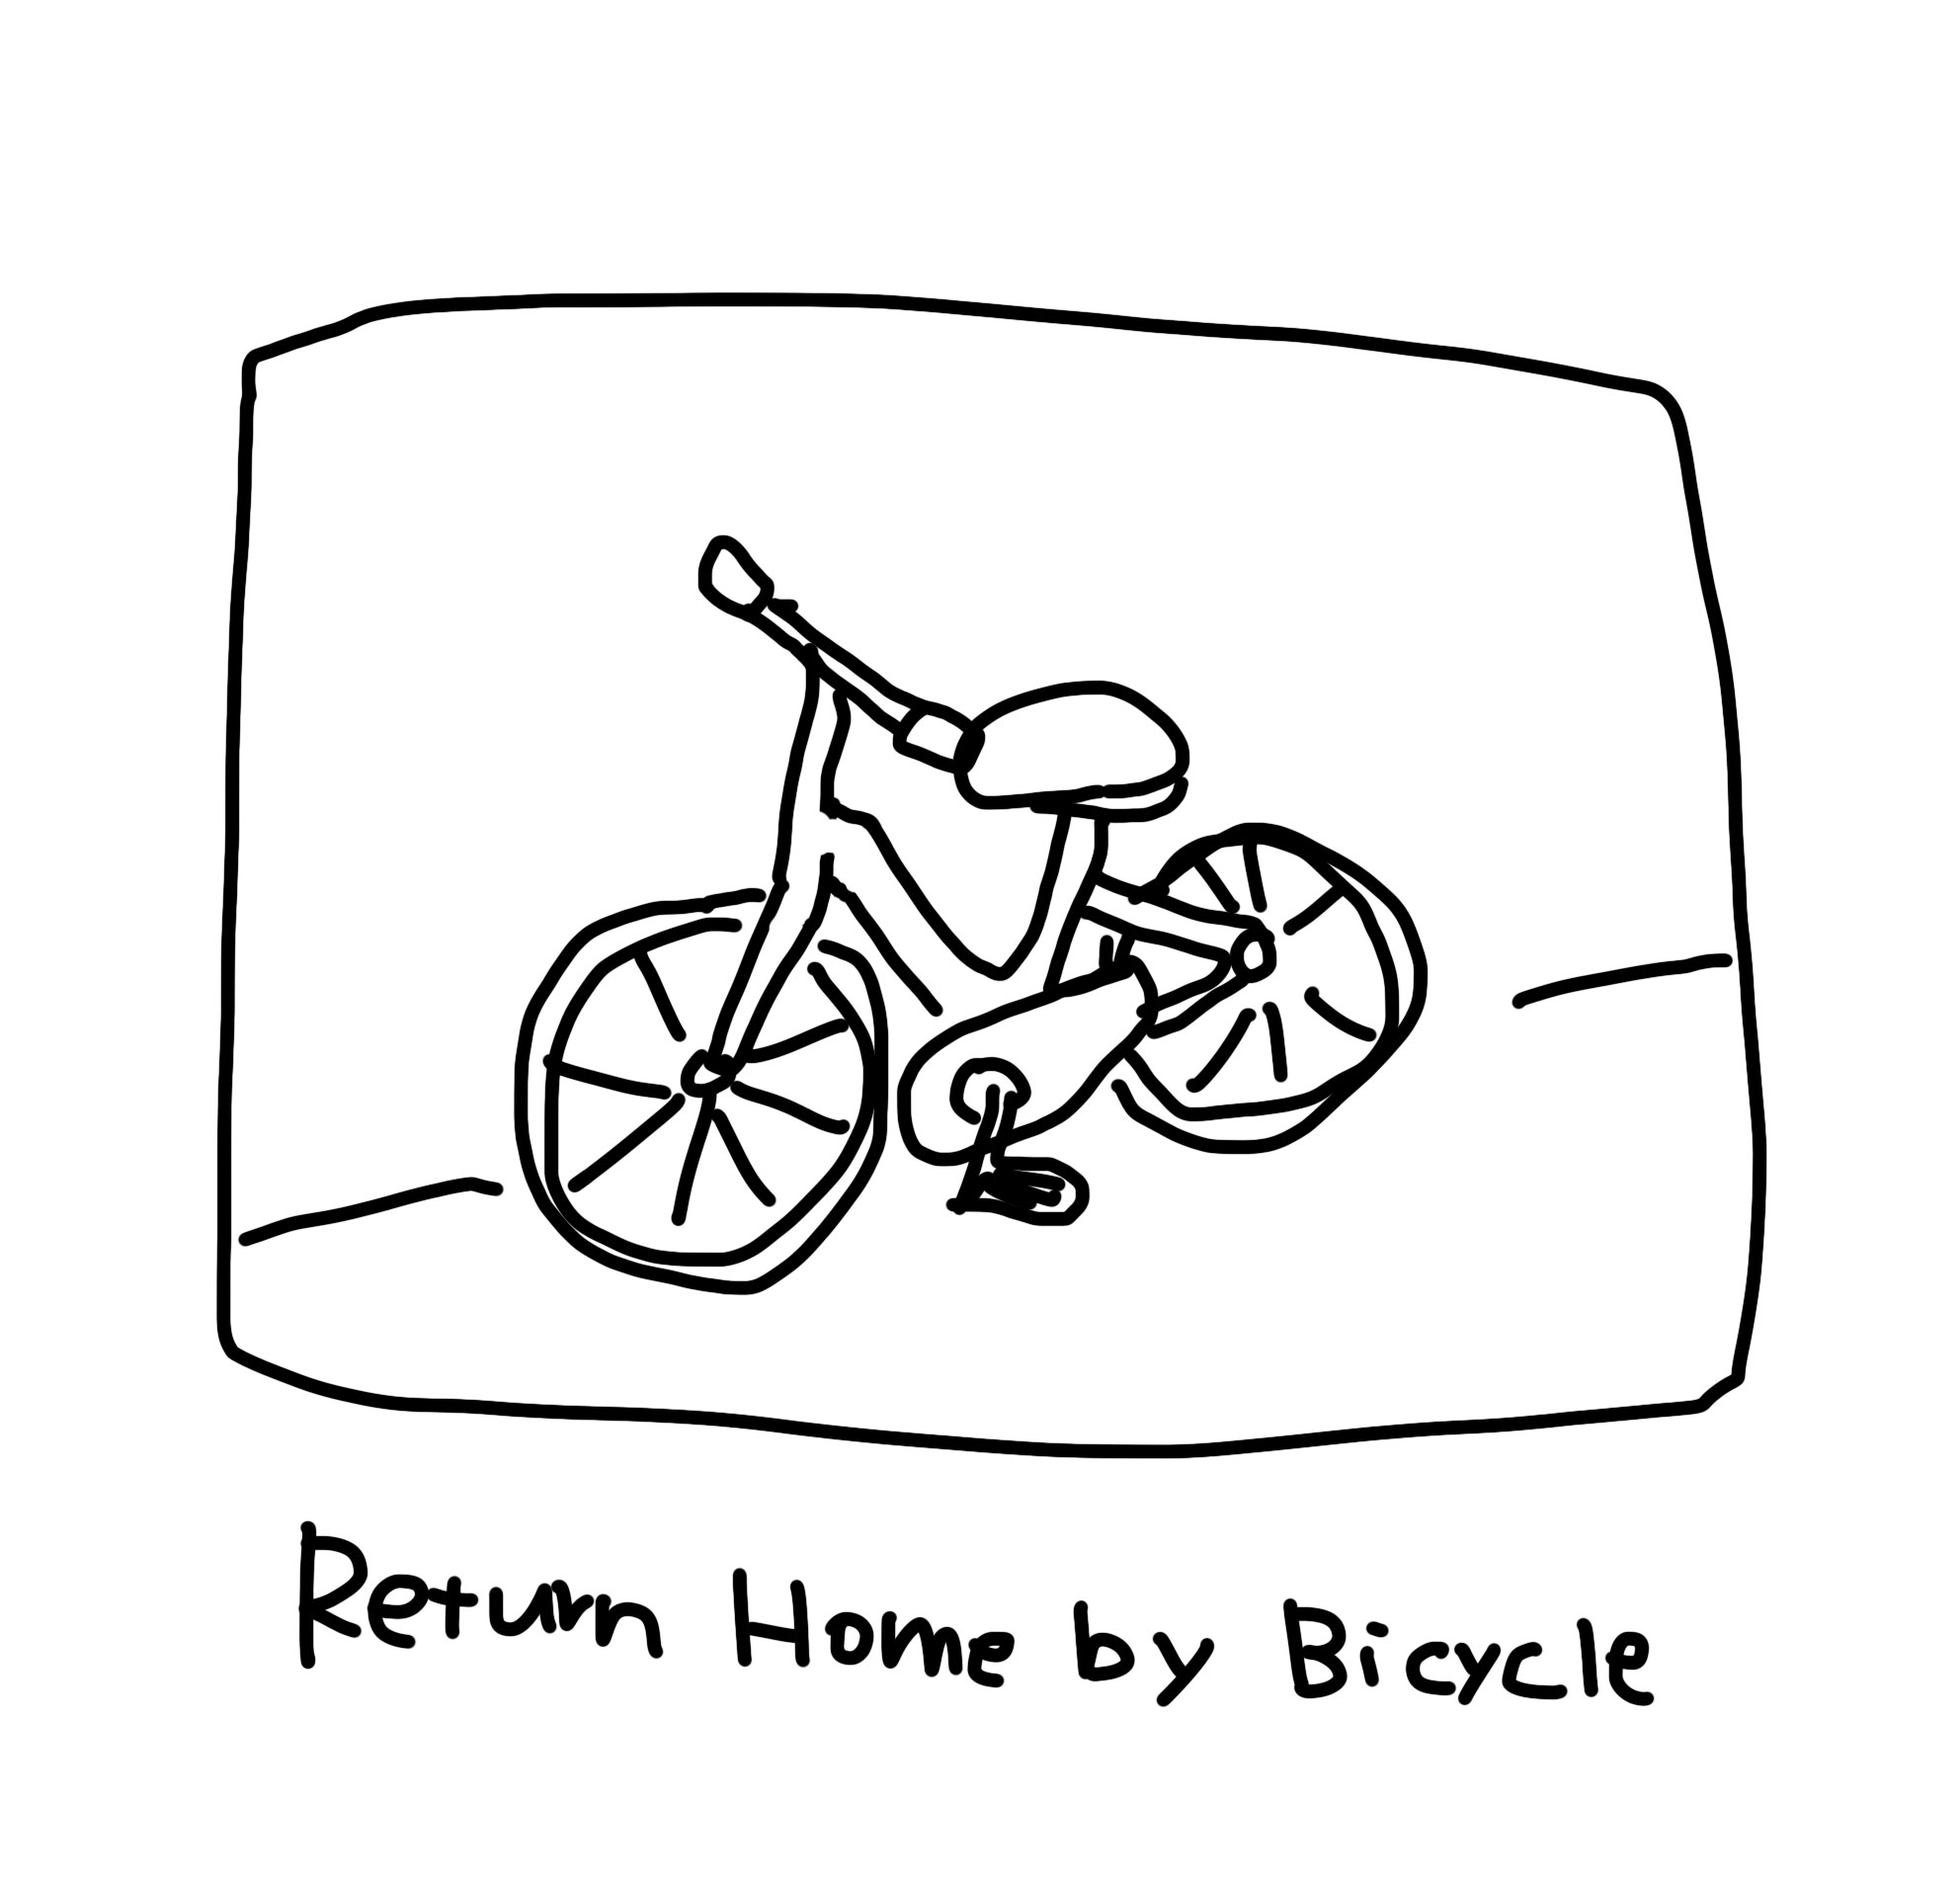 Return Home by Bicycle